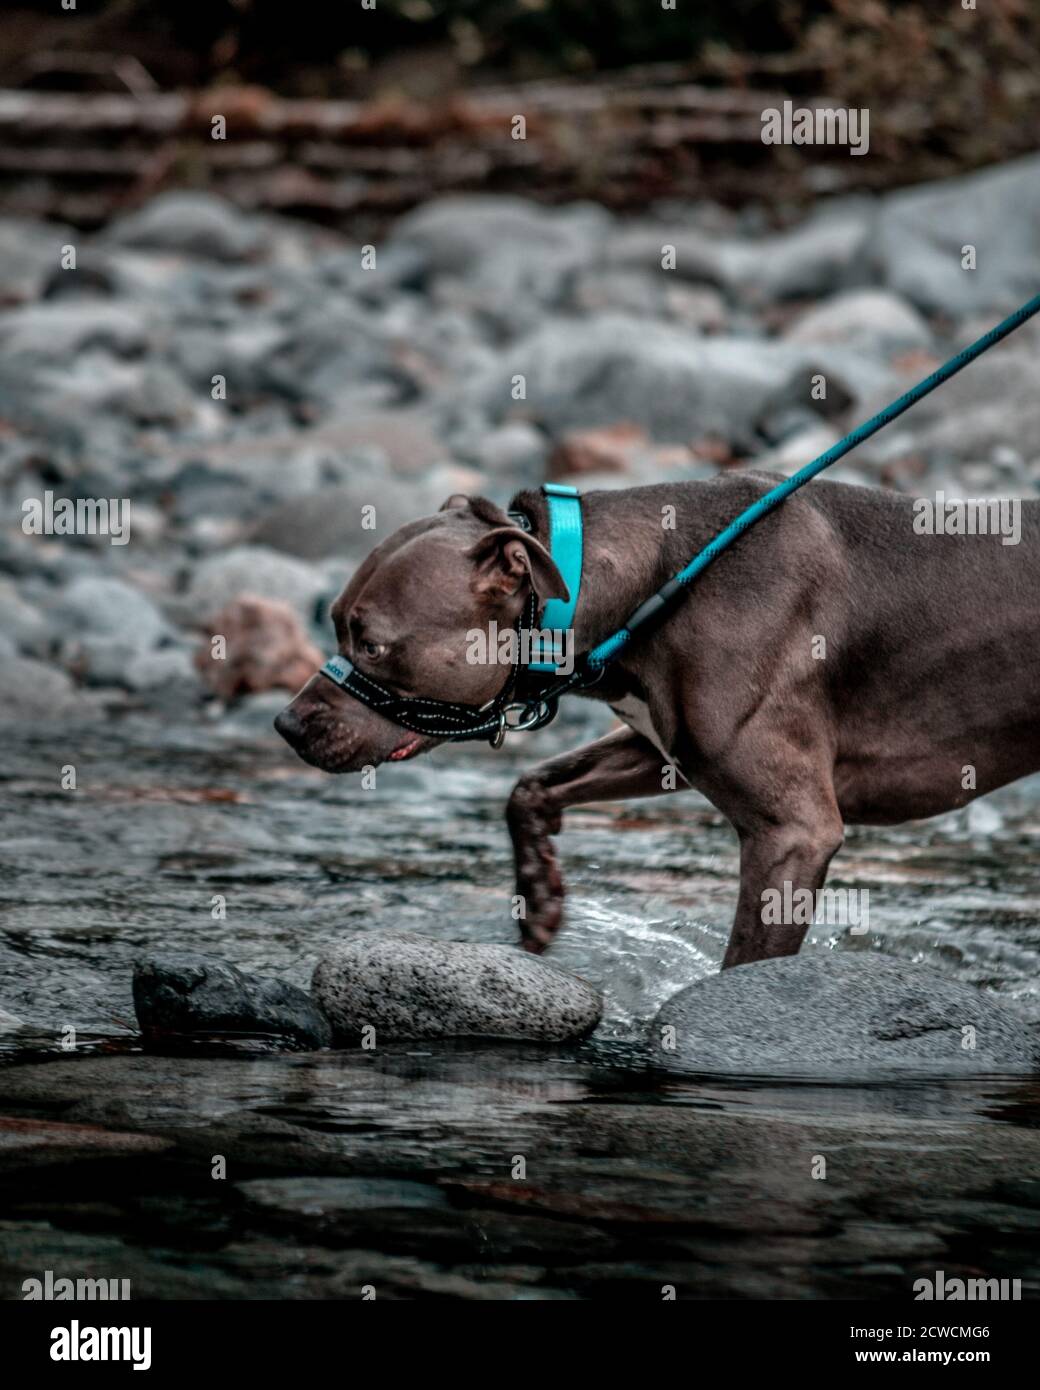 4 Year Old Pitbull Dog walking through the river on a bright blue leash. Stock Photo